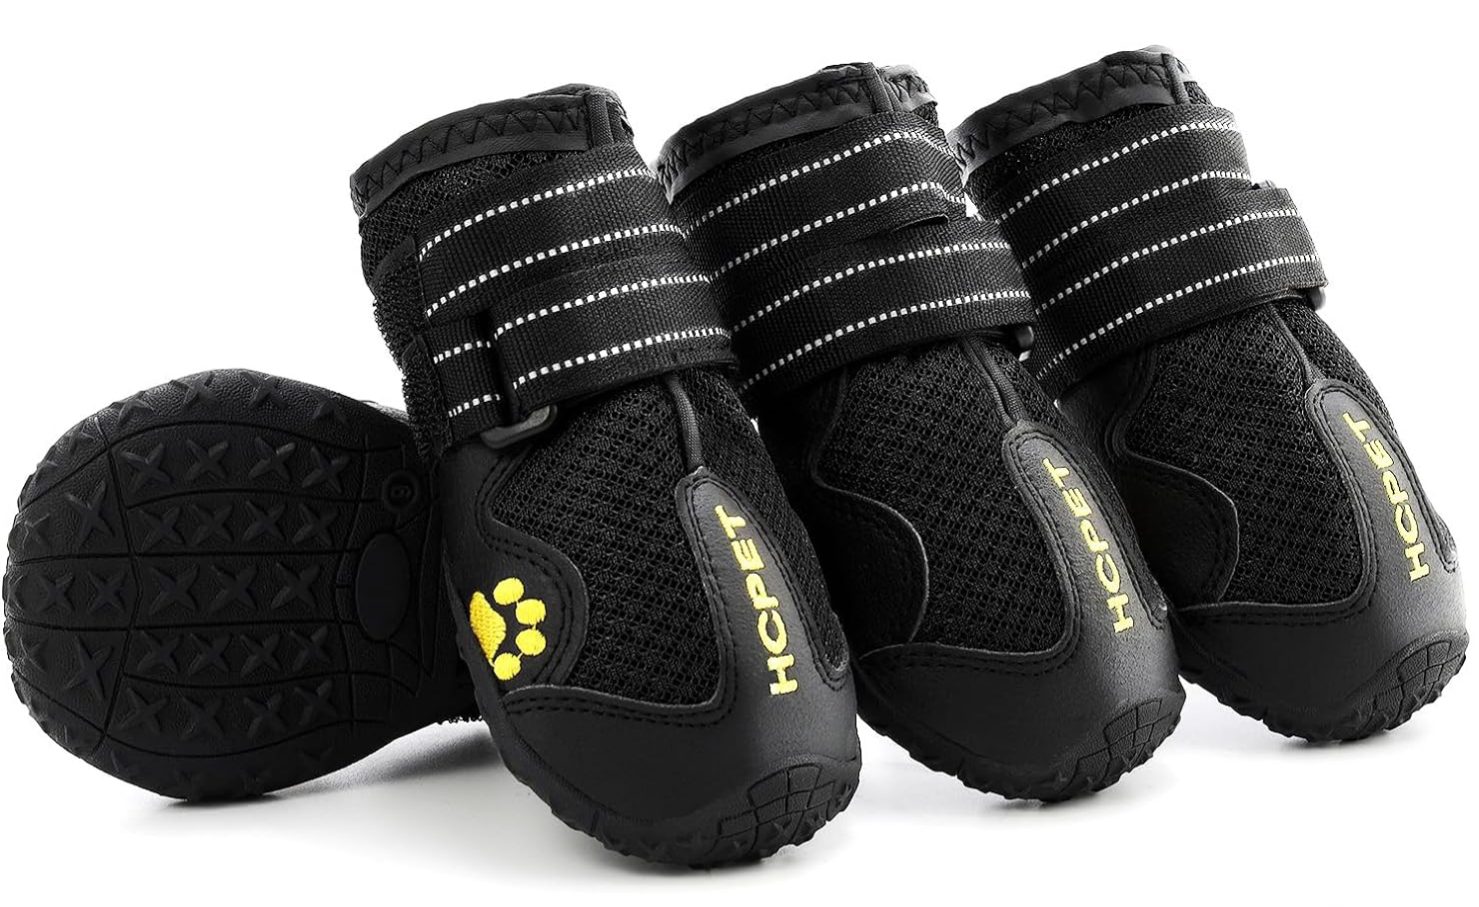 Hcpet Paw Protector Dog Boots